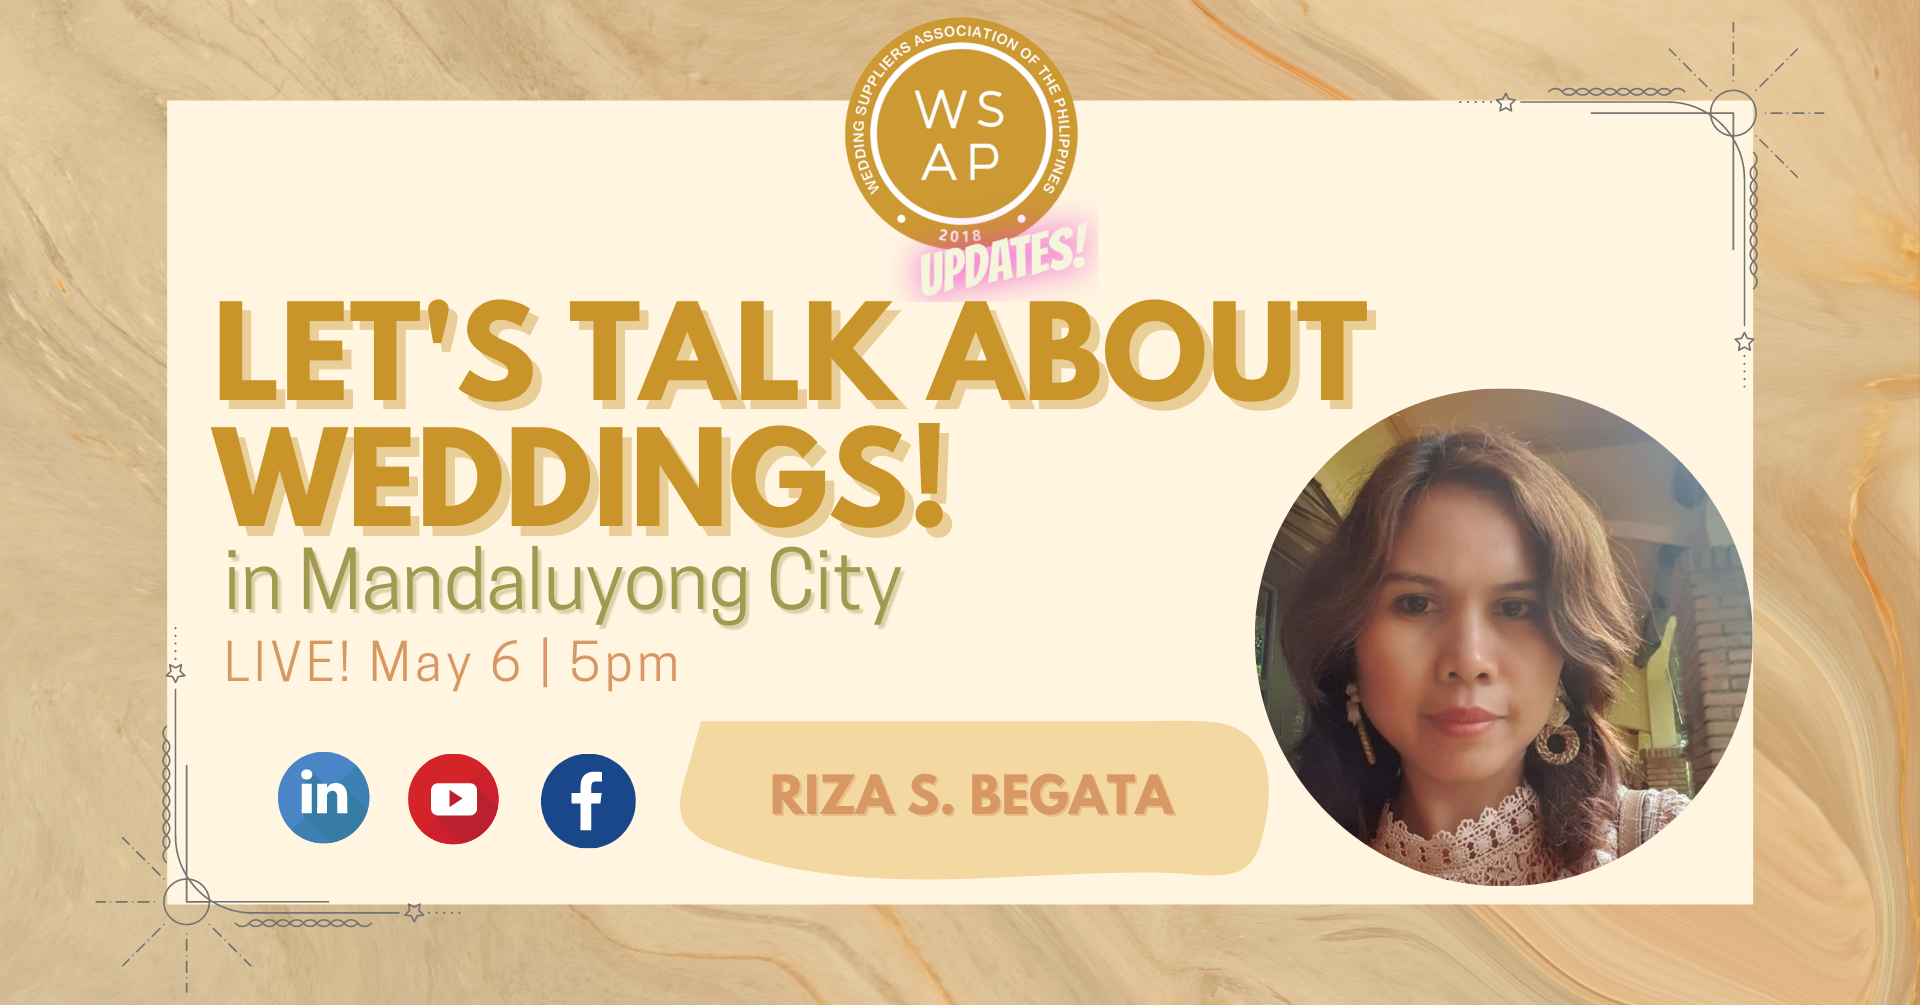 Let's Talk About Weddings in Mandaluyong City with Riza S. Begata